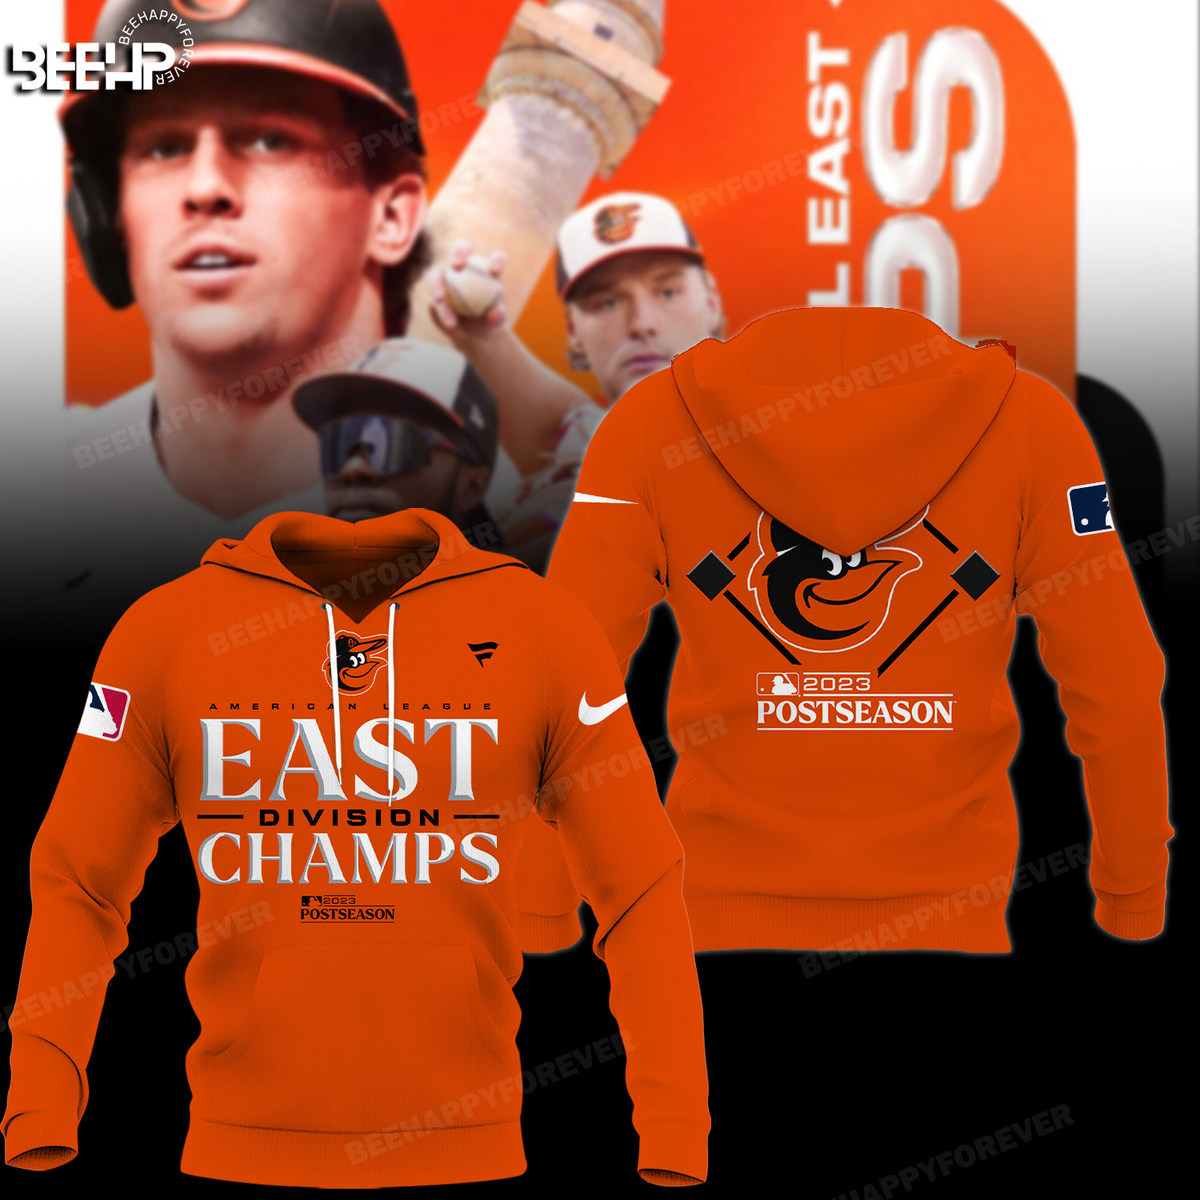 Baltimore Orioles 2023 AL East Division Champions Baseball Jersey